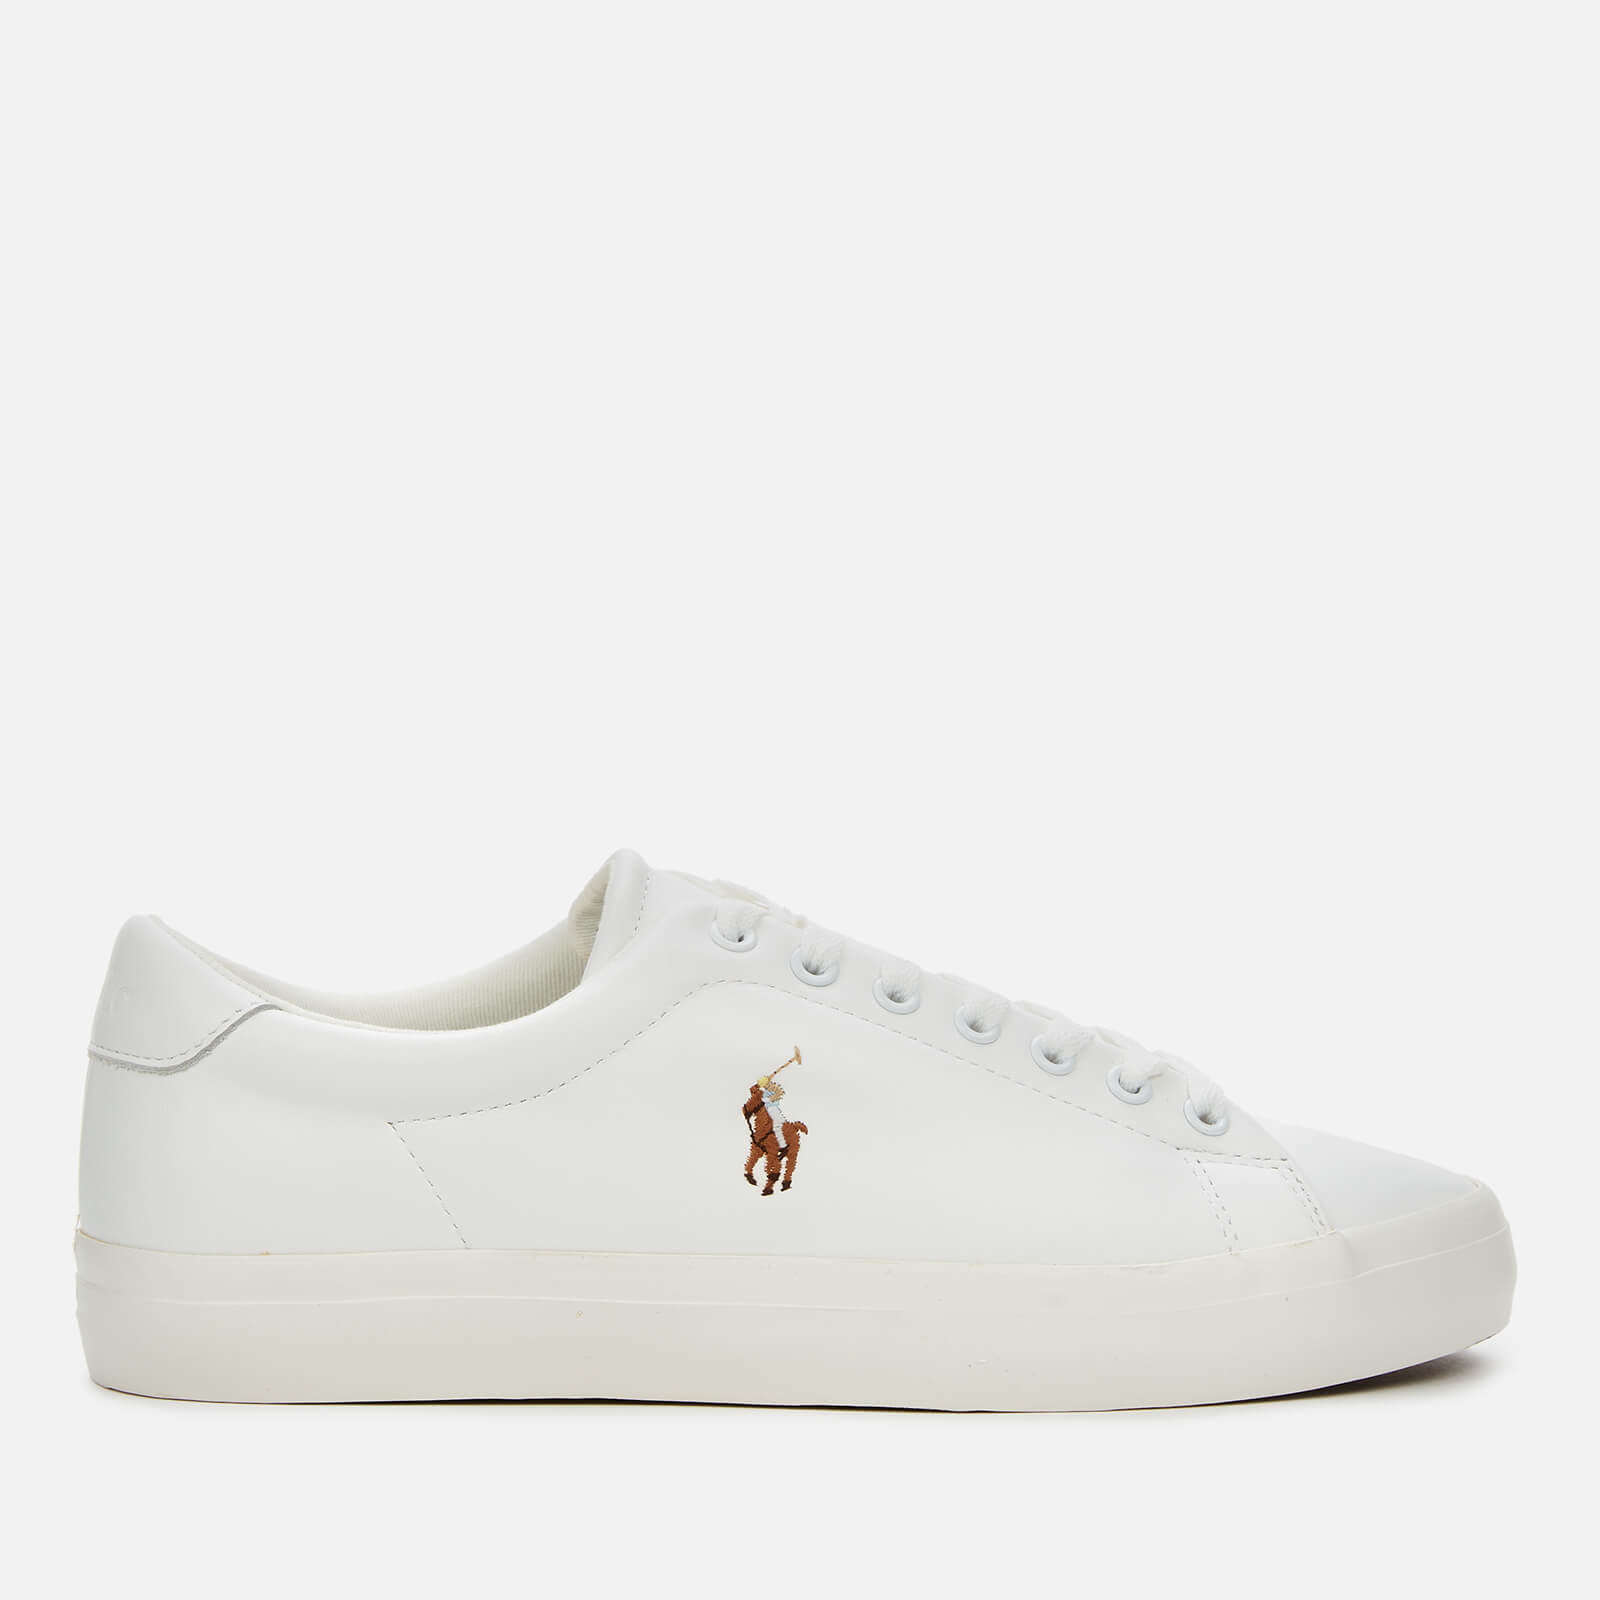 Polo Ralph Lauren Men’s Longwood Leather Low Top Trainers - White/White